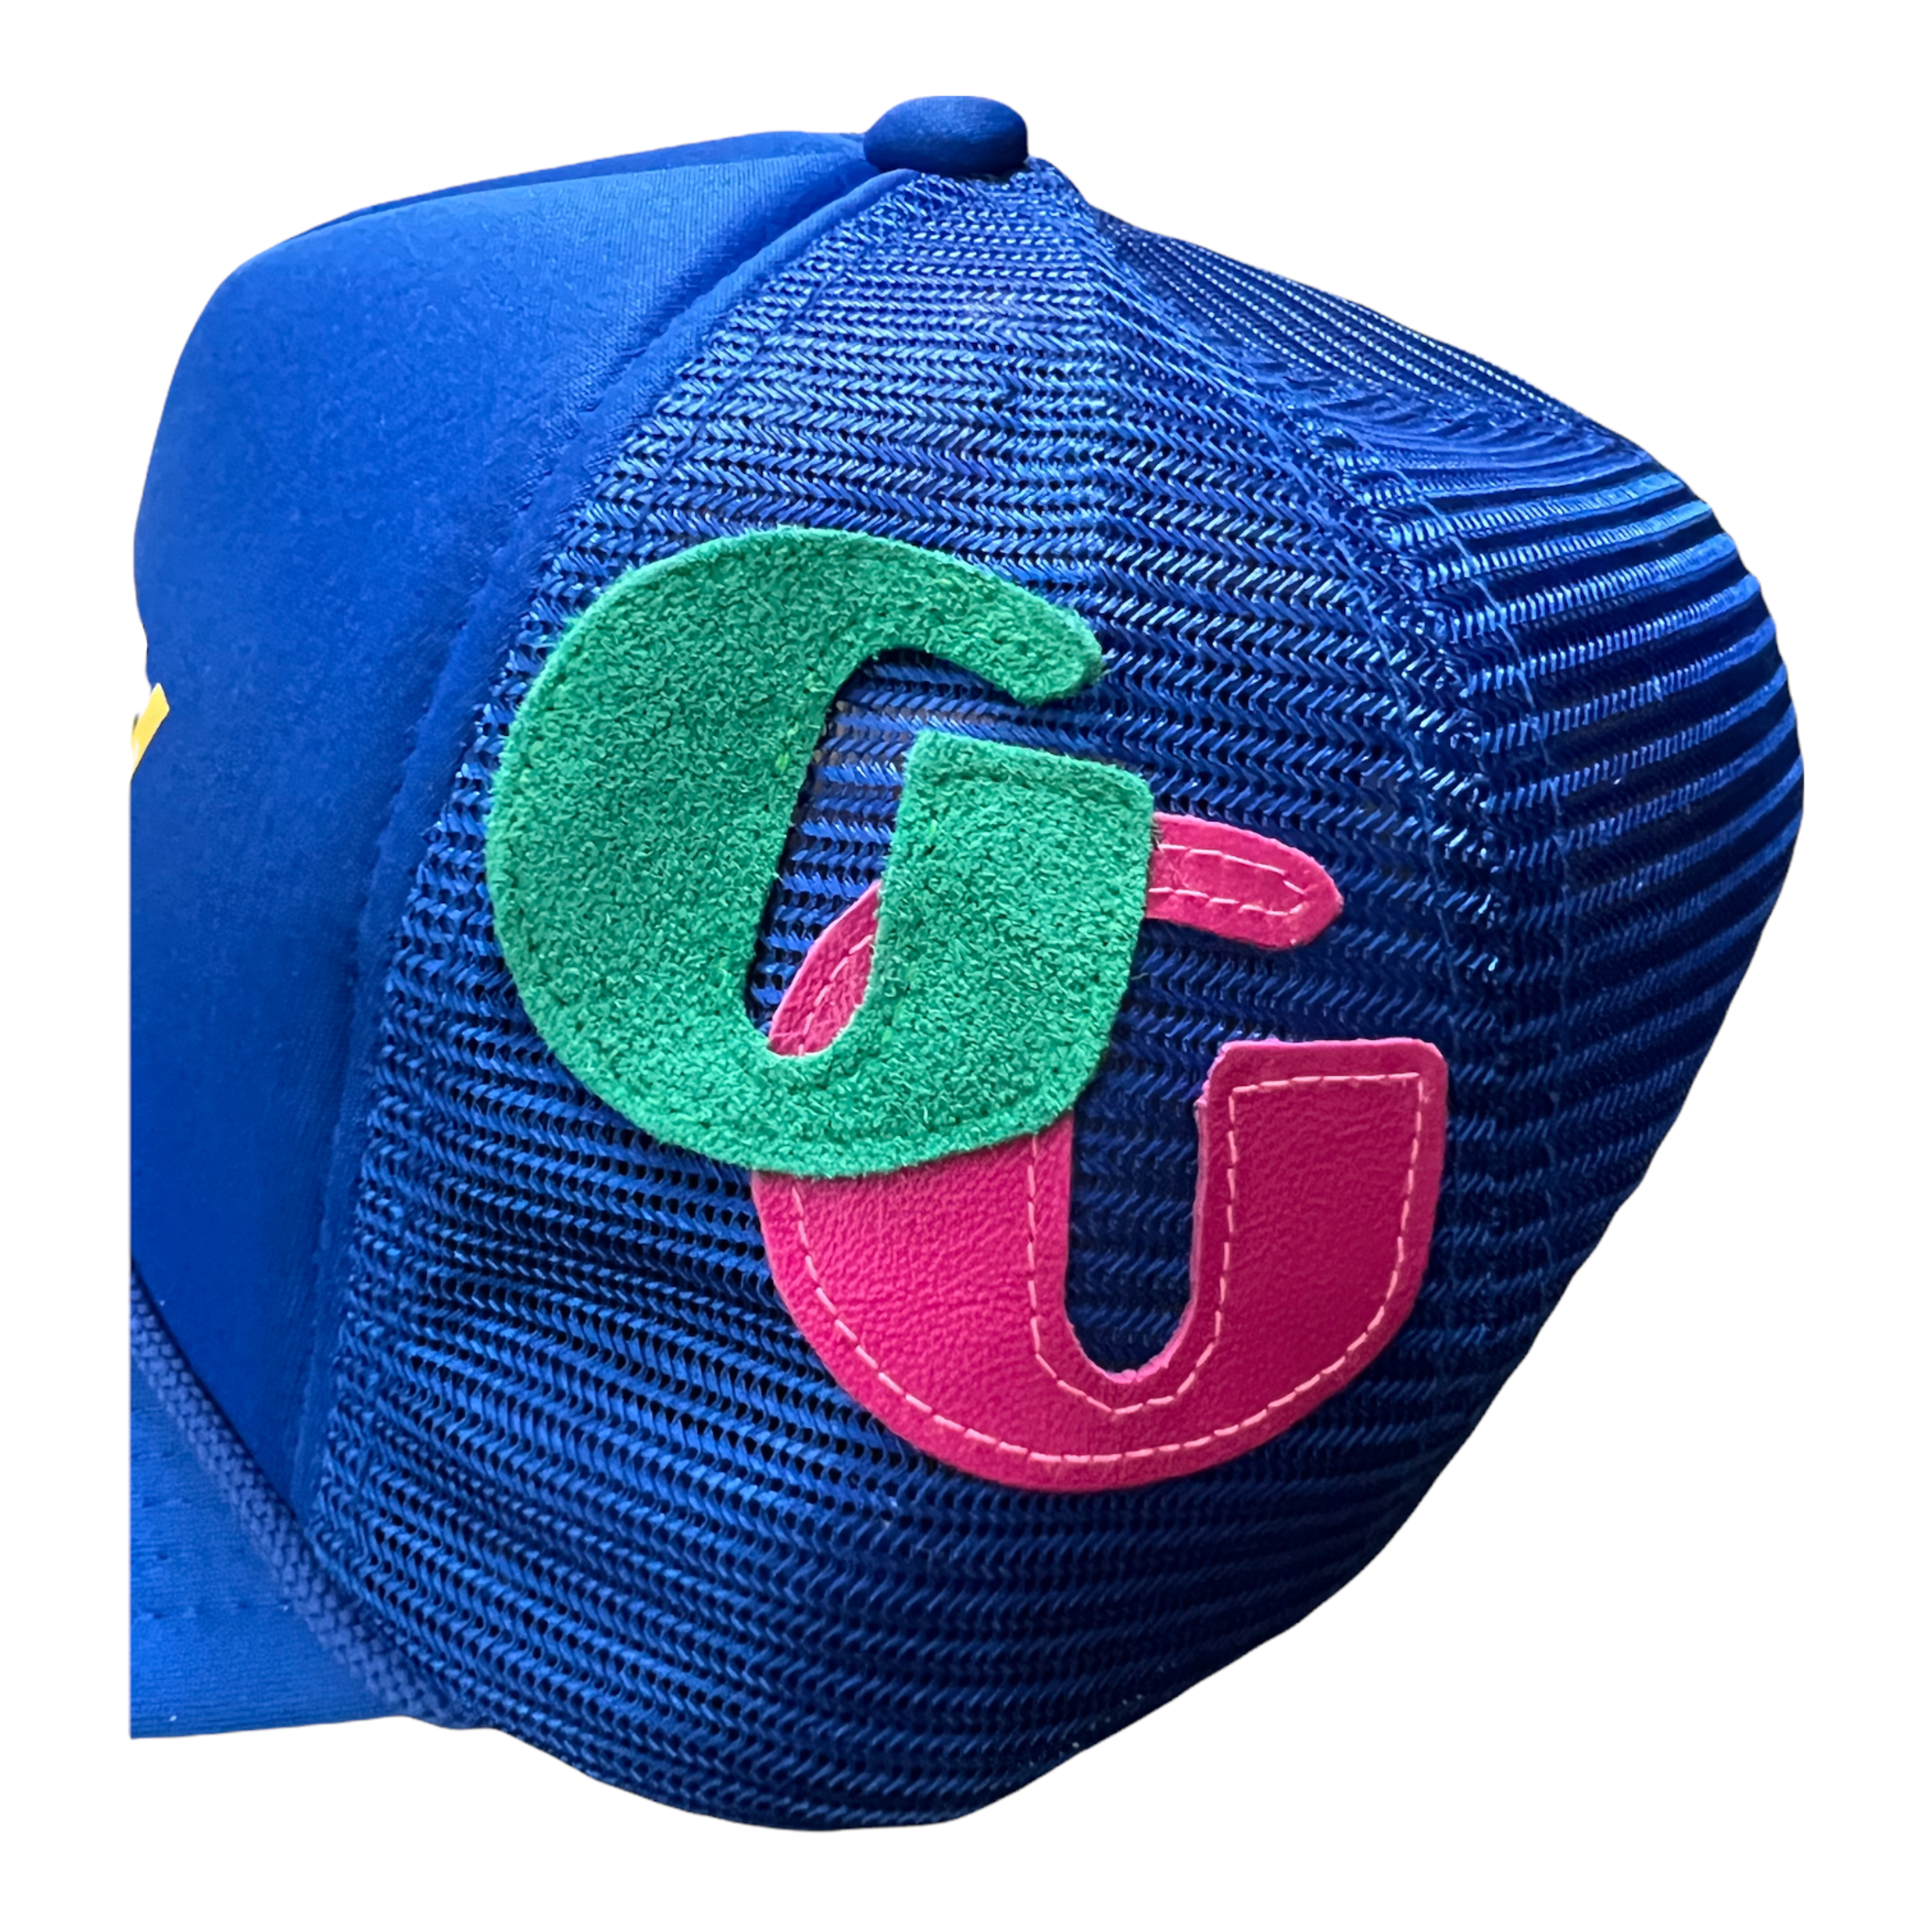 Alternate View 3 of Gallery Department Logo Trucker Hat Blue Yellow (4 G Patch Custo